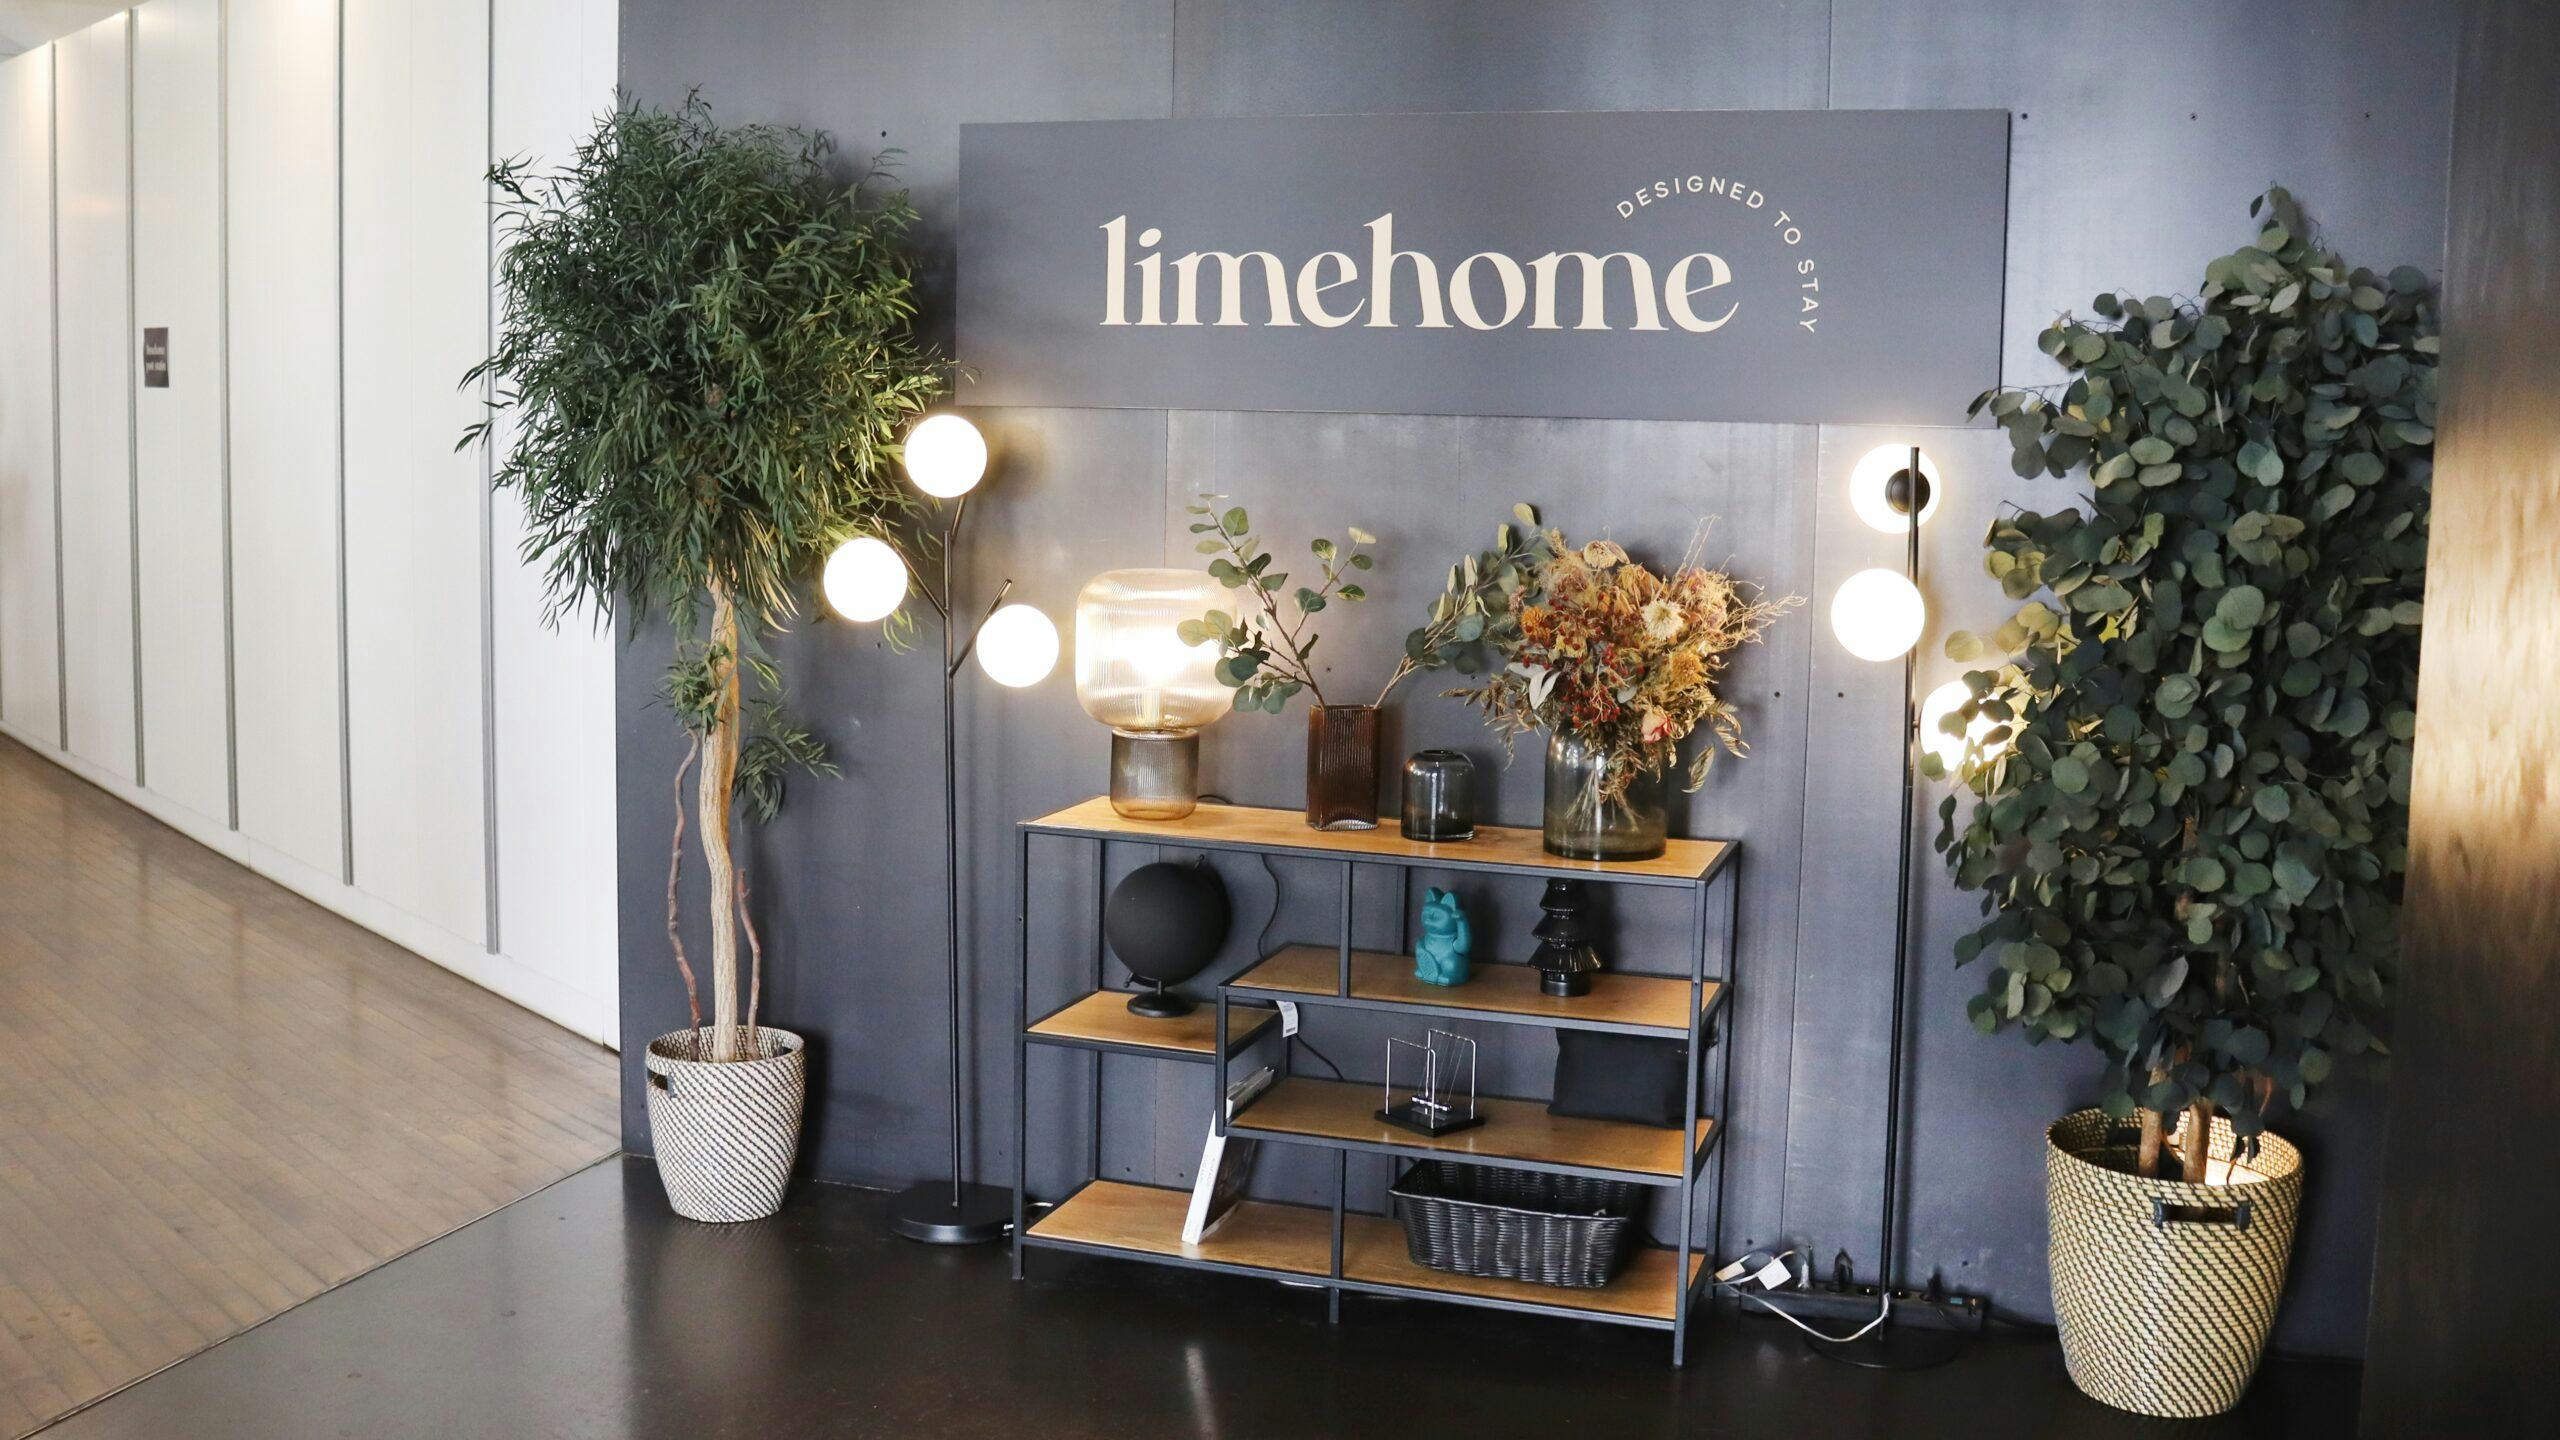 Digitaal hotelconcept Limehome opent in Amsterdam